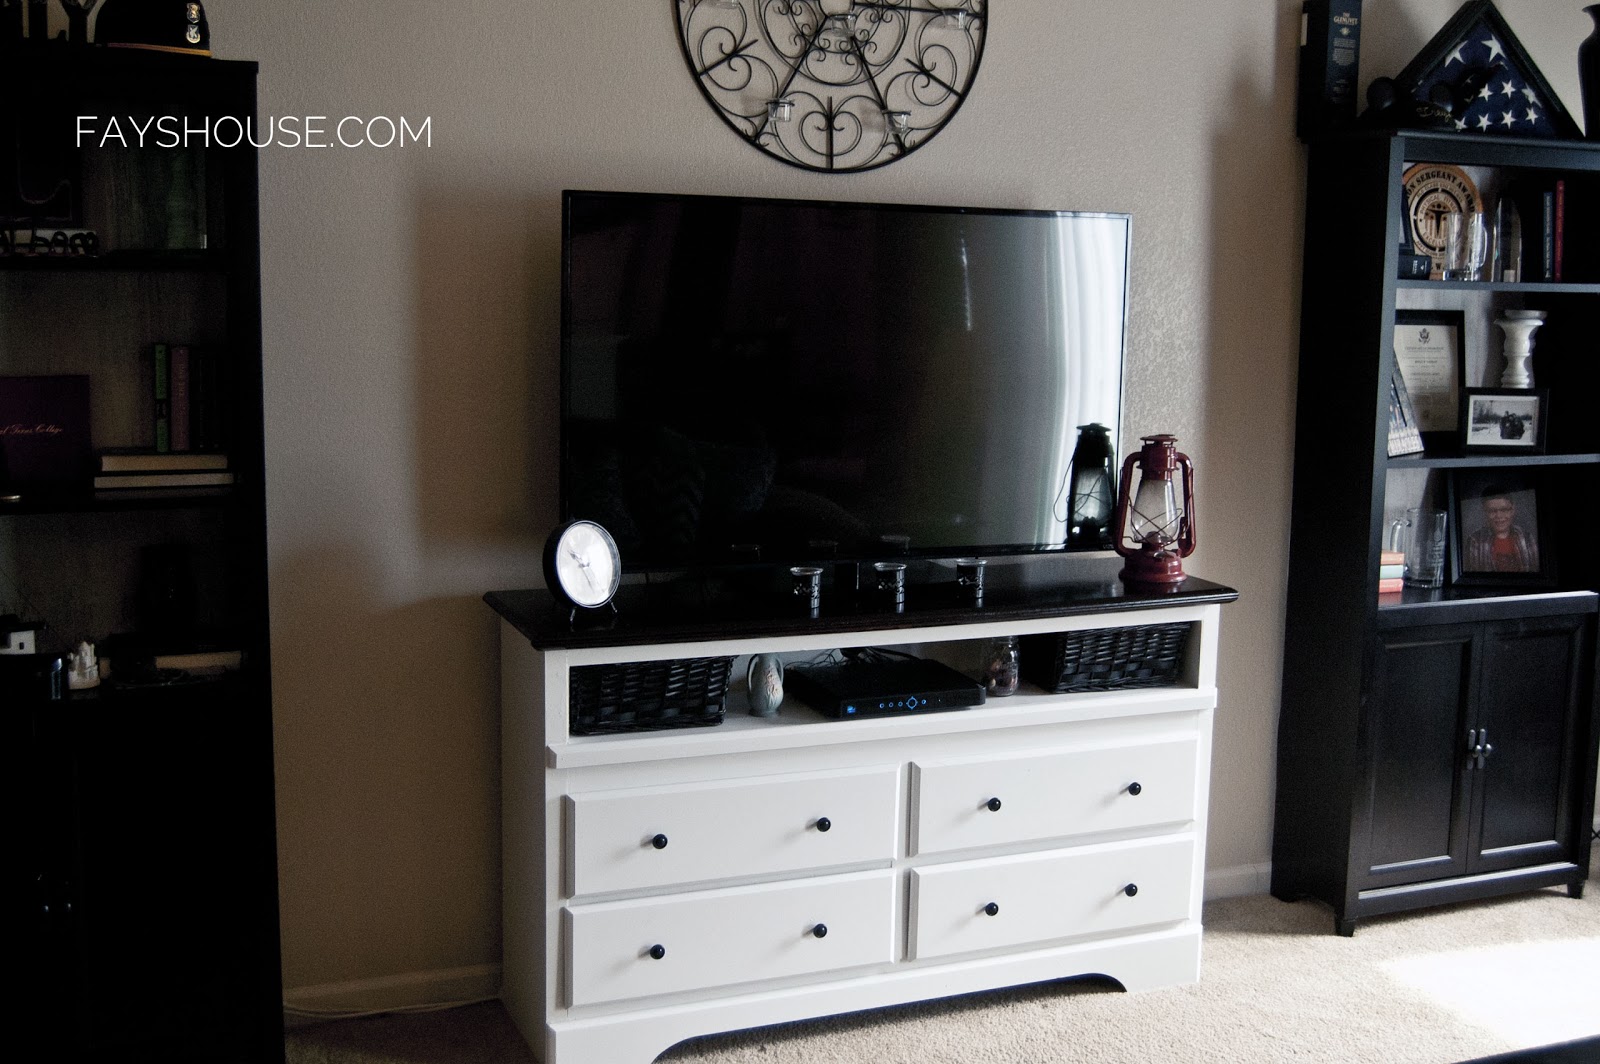 Turn Dresser Tv Stand Easy Fay House Wood Filing Cabinet ...